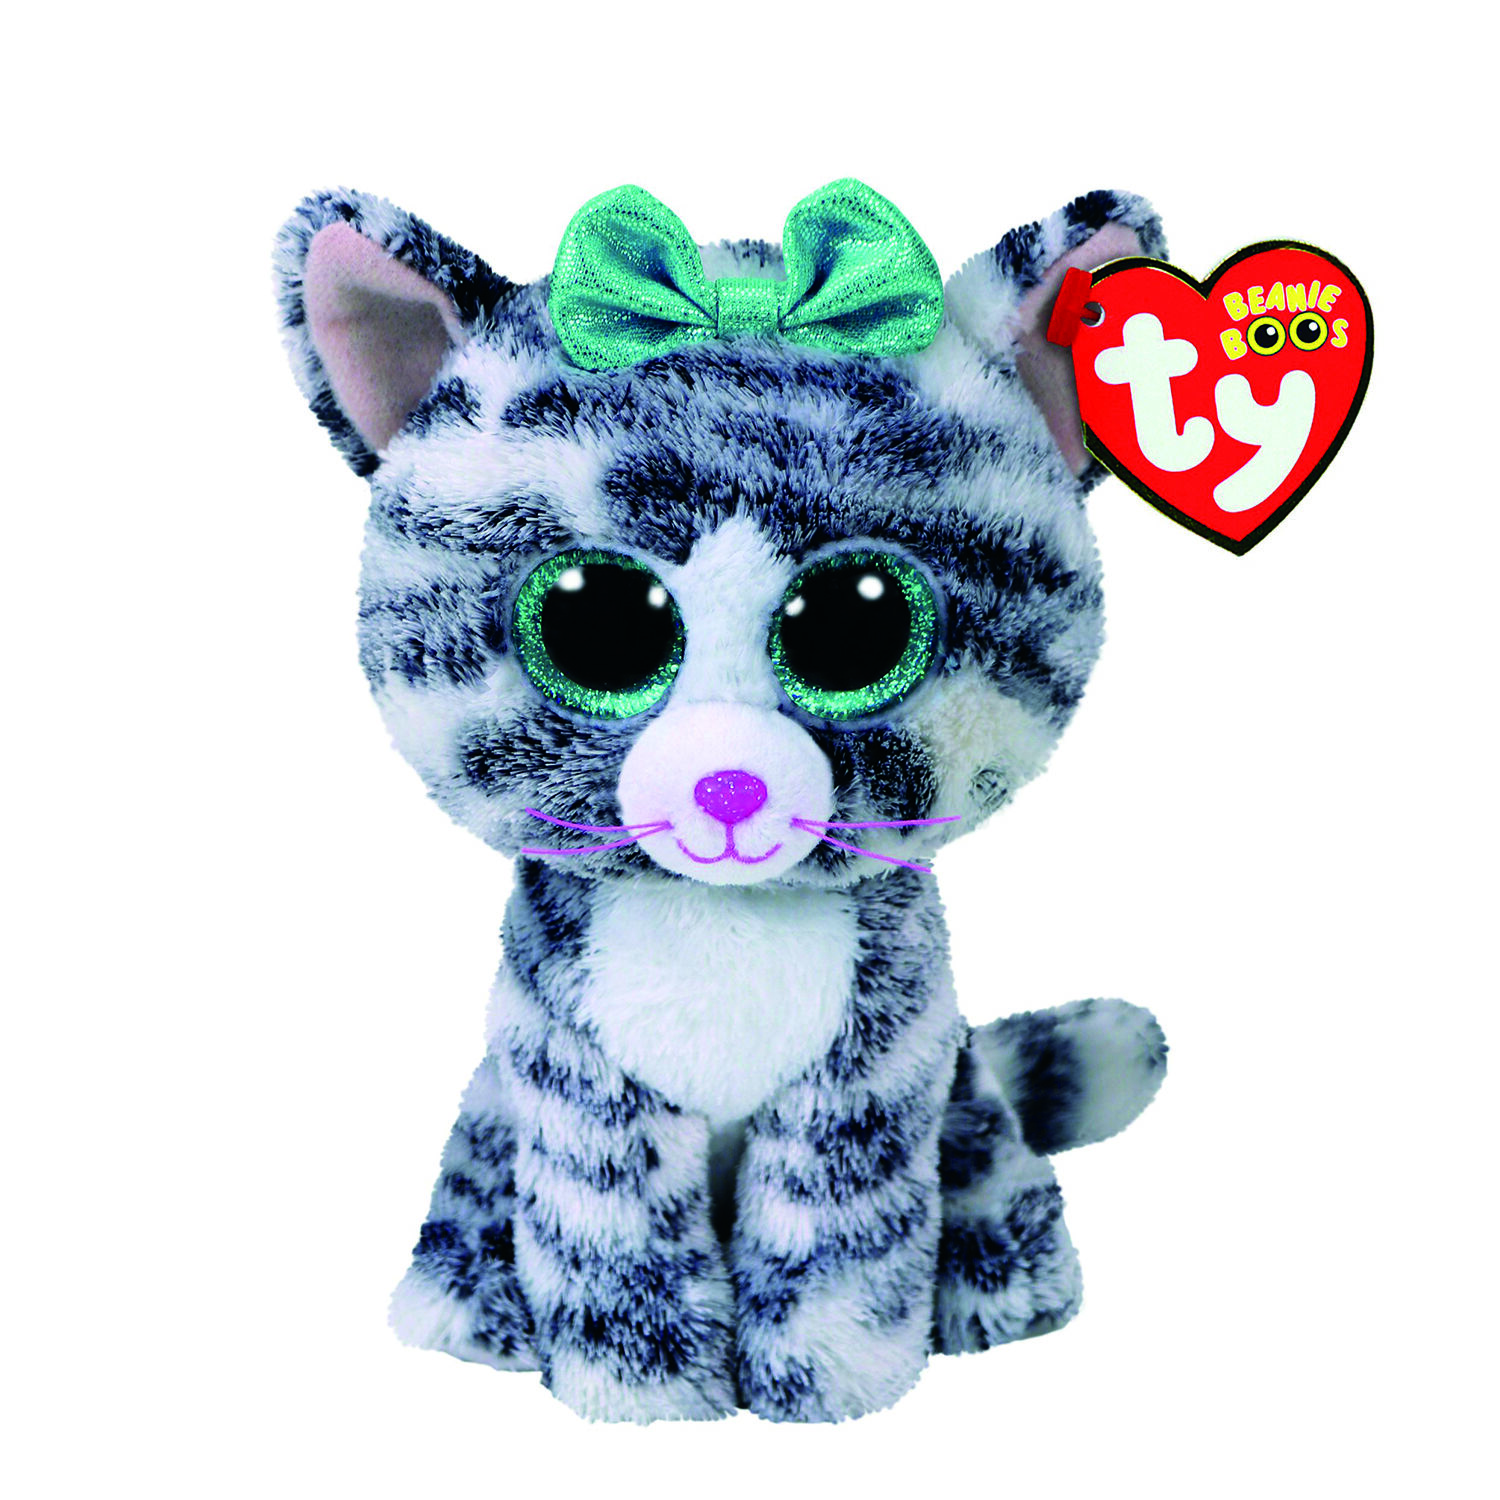 9 Inch Medium Buddy Size Claire's Excl Ty Beanie Boos ~ HAUNTS the Ghost NEW 